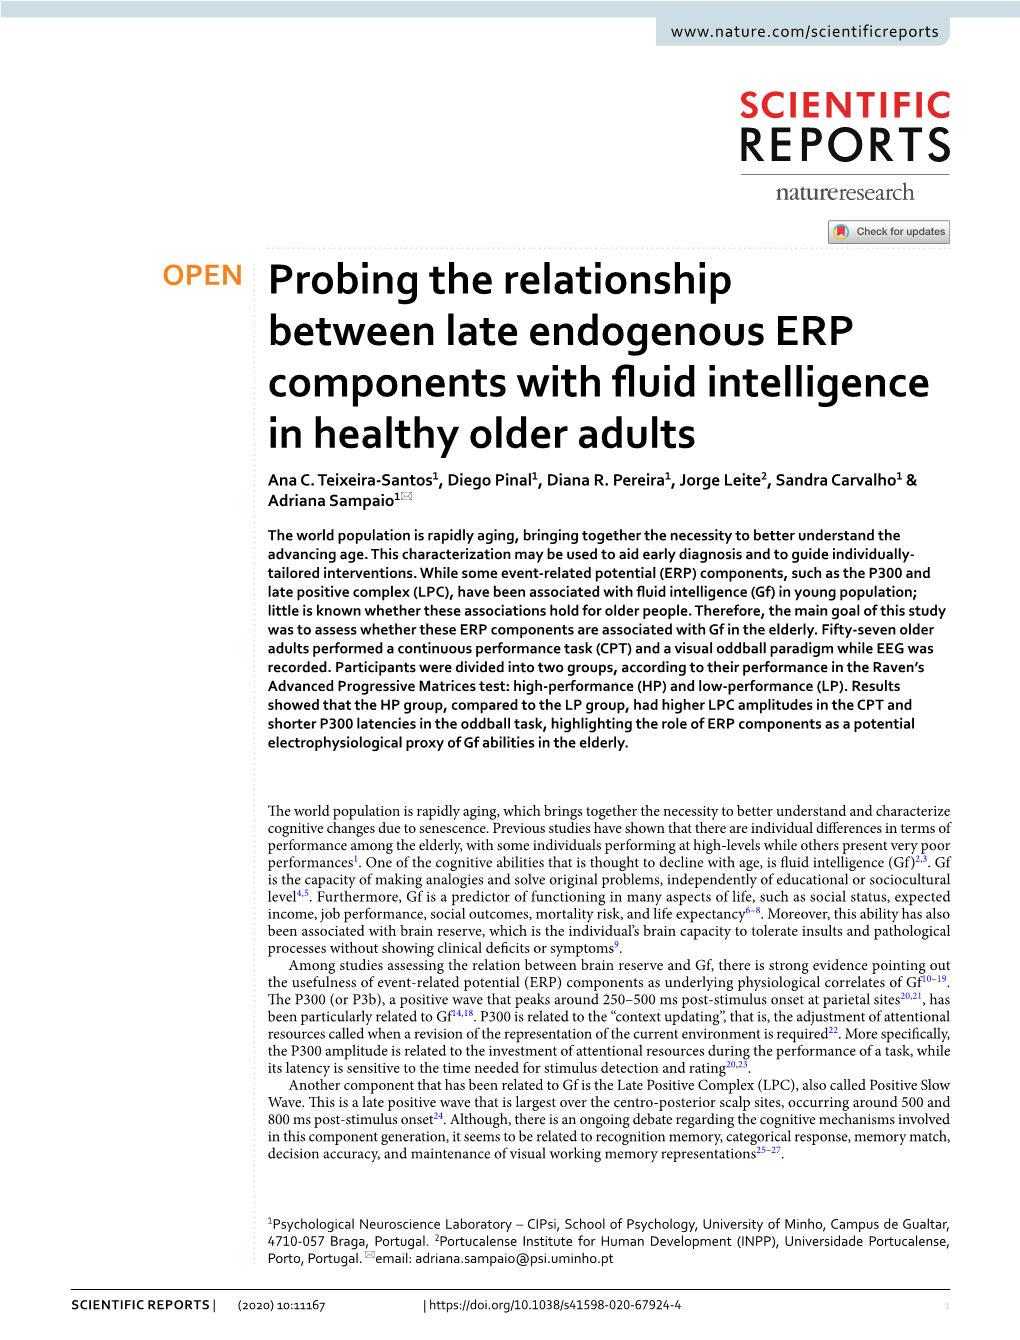 Probing the Relationship Between Late Endogenous ERP Components with Fuid Intelligence in Healthy Older Adults Ana C